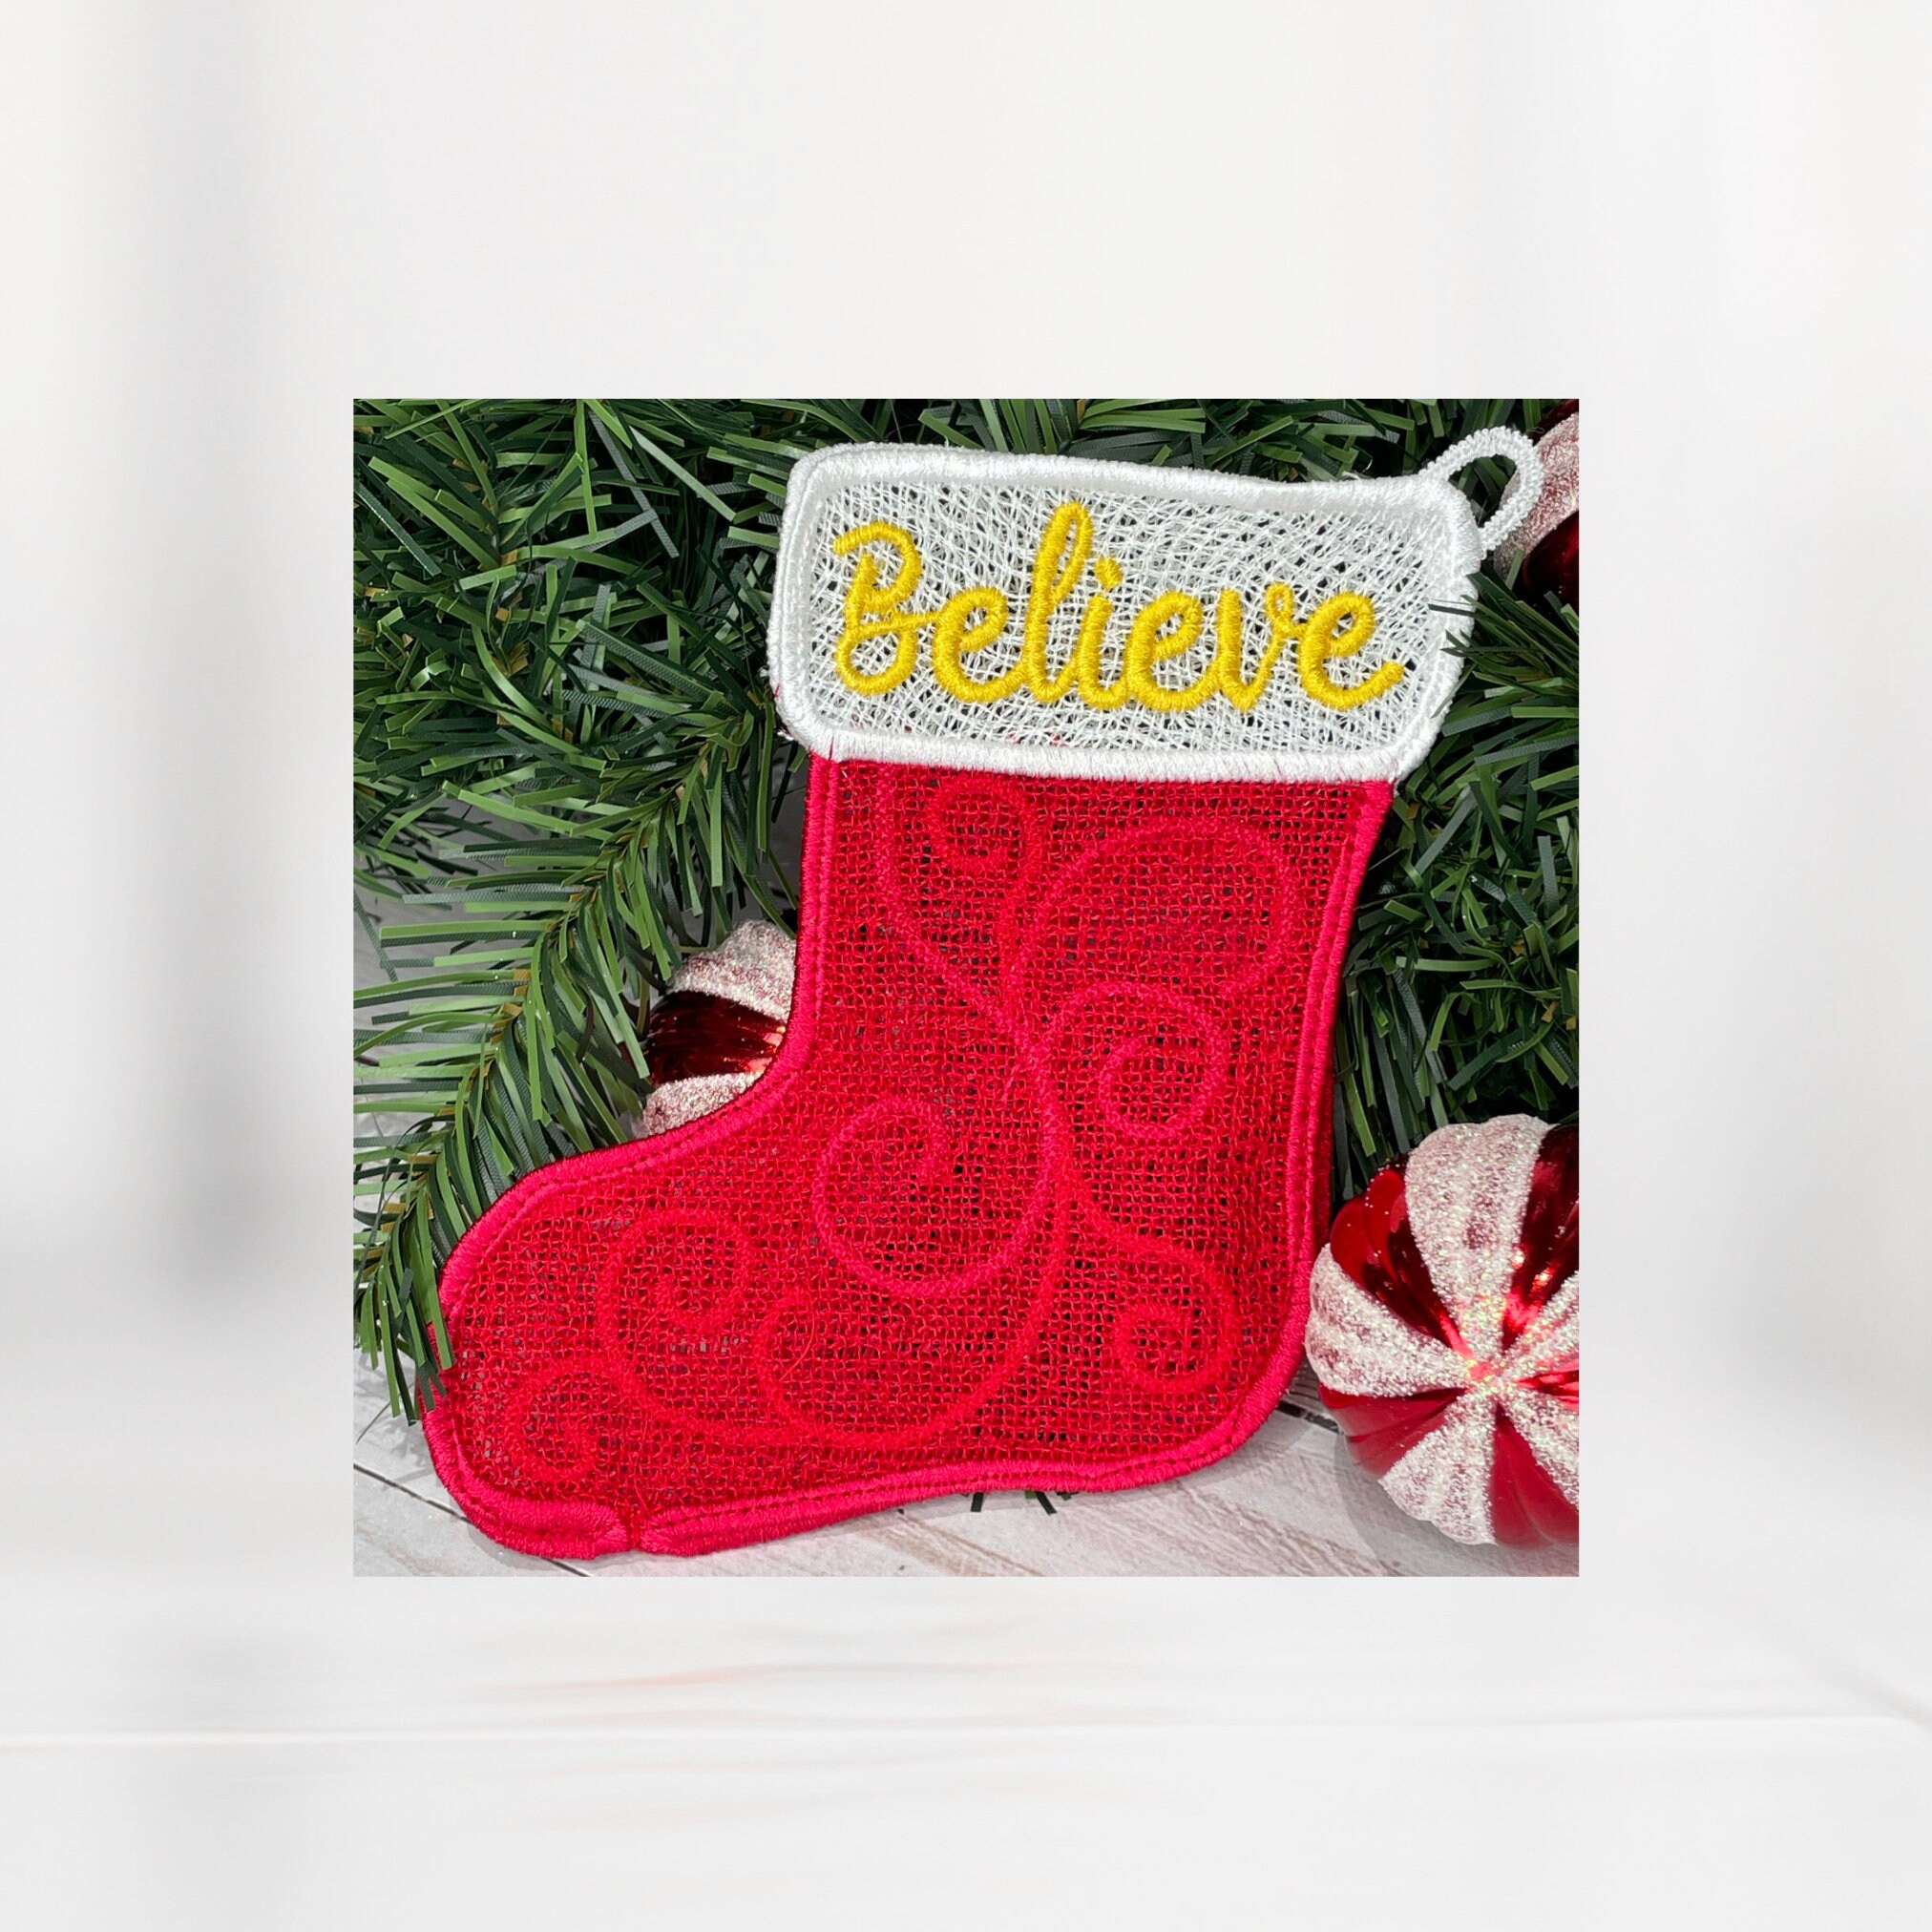 Birdie Holiday Gift Card Holders - Fits a 4x4 Hoop - Instant Downloadable  Machine Embroidery - Light Fill Stitch